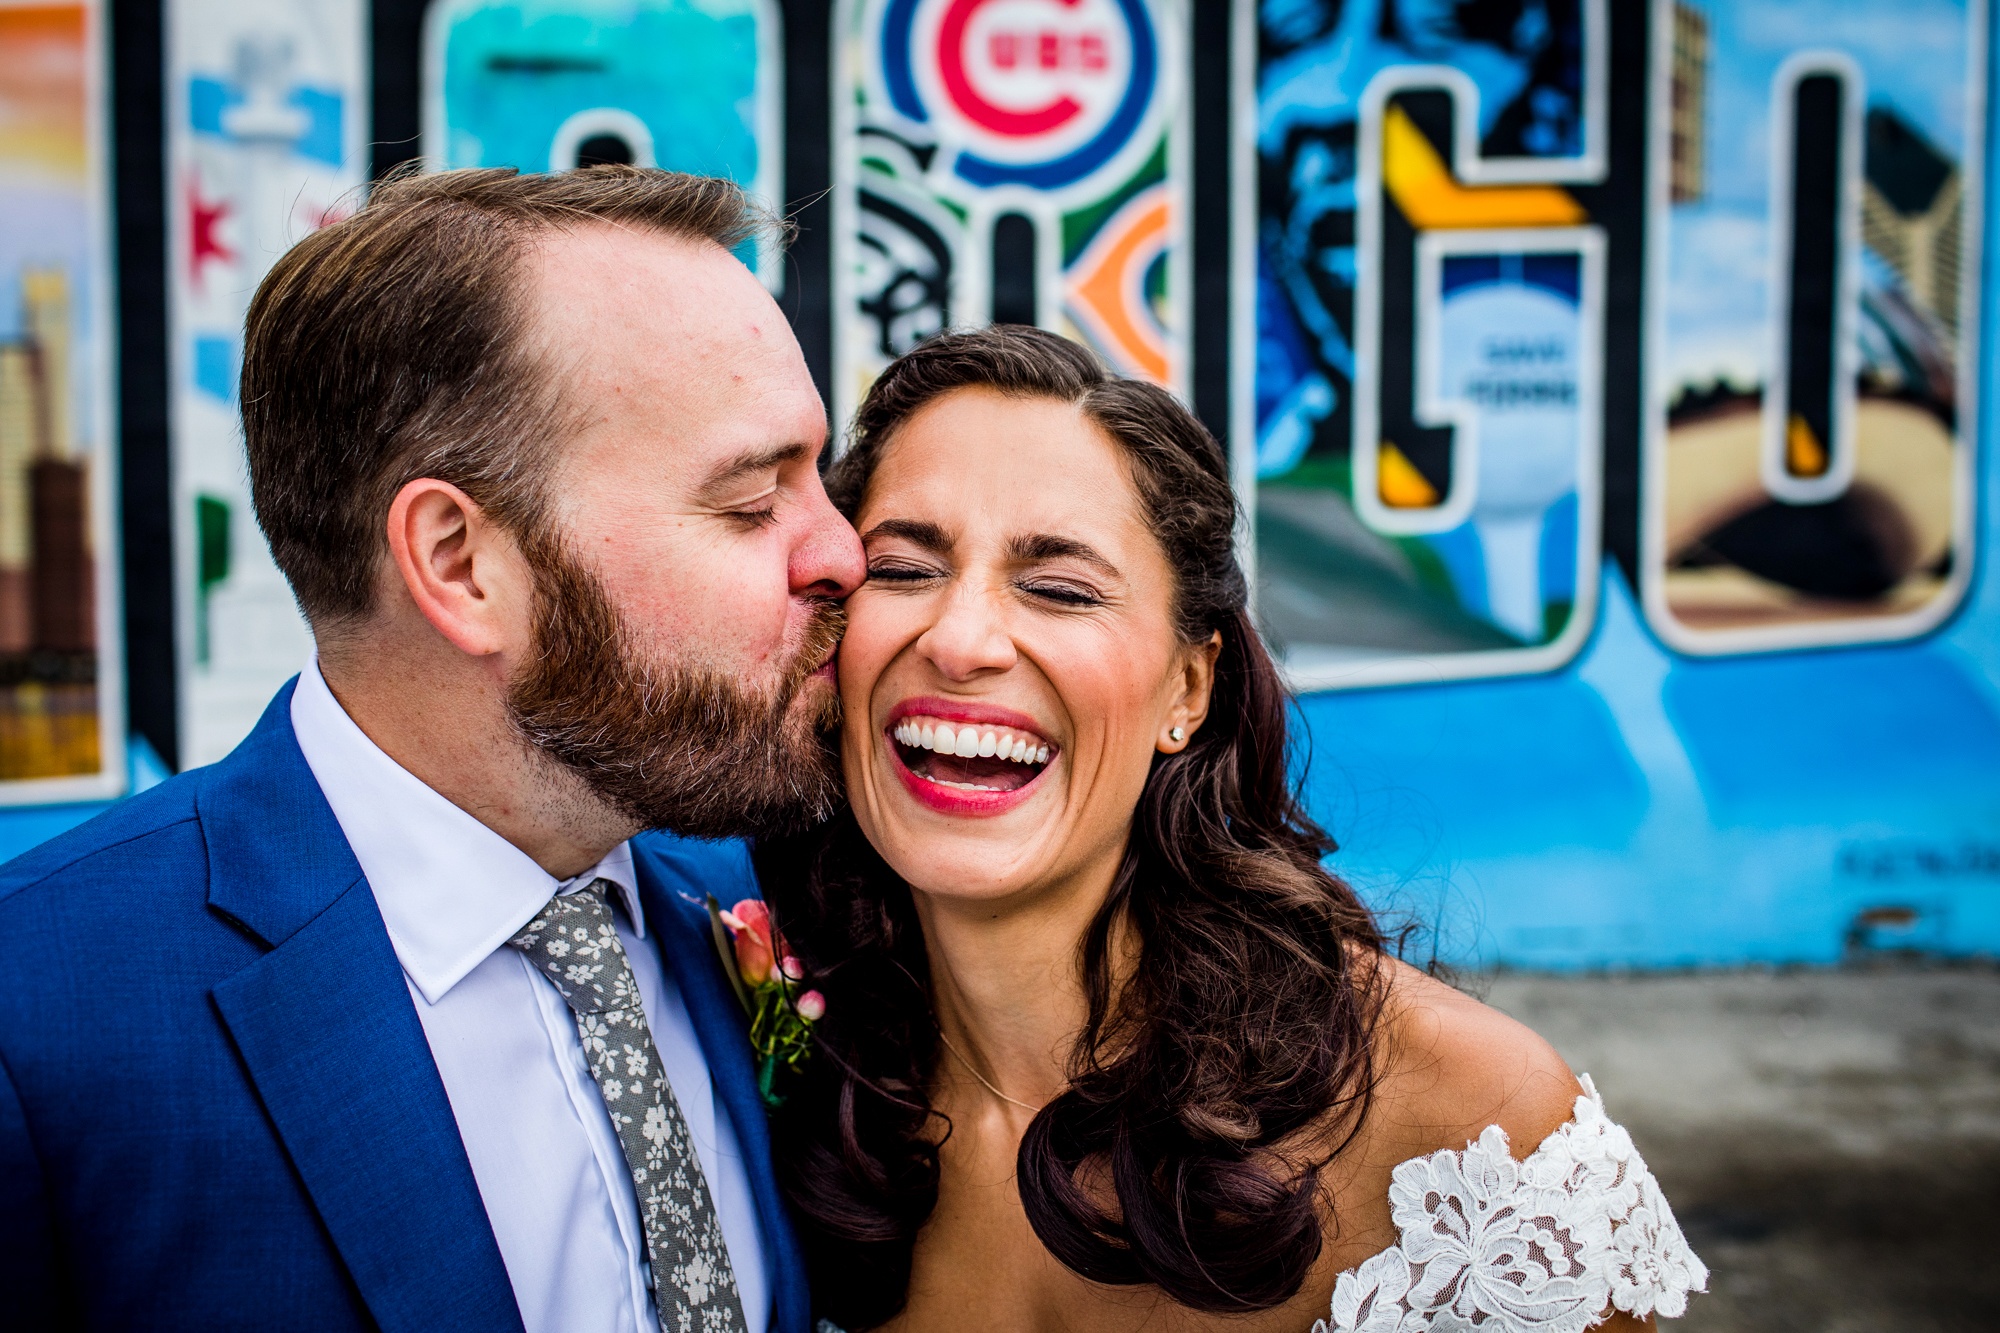 A groom kisses his bride on the cheek in front of the Chicago mural in Logan Square.